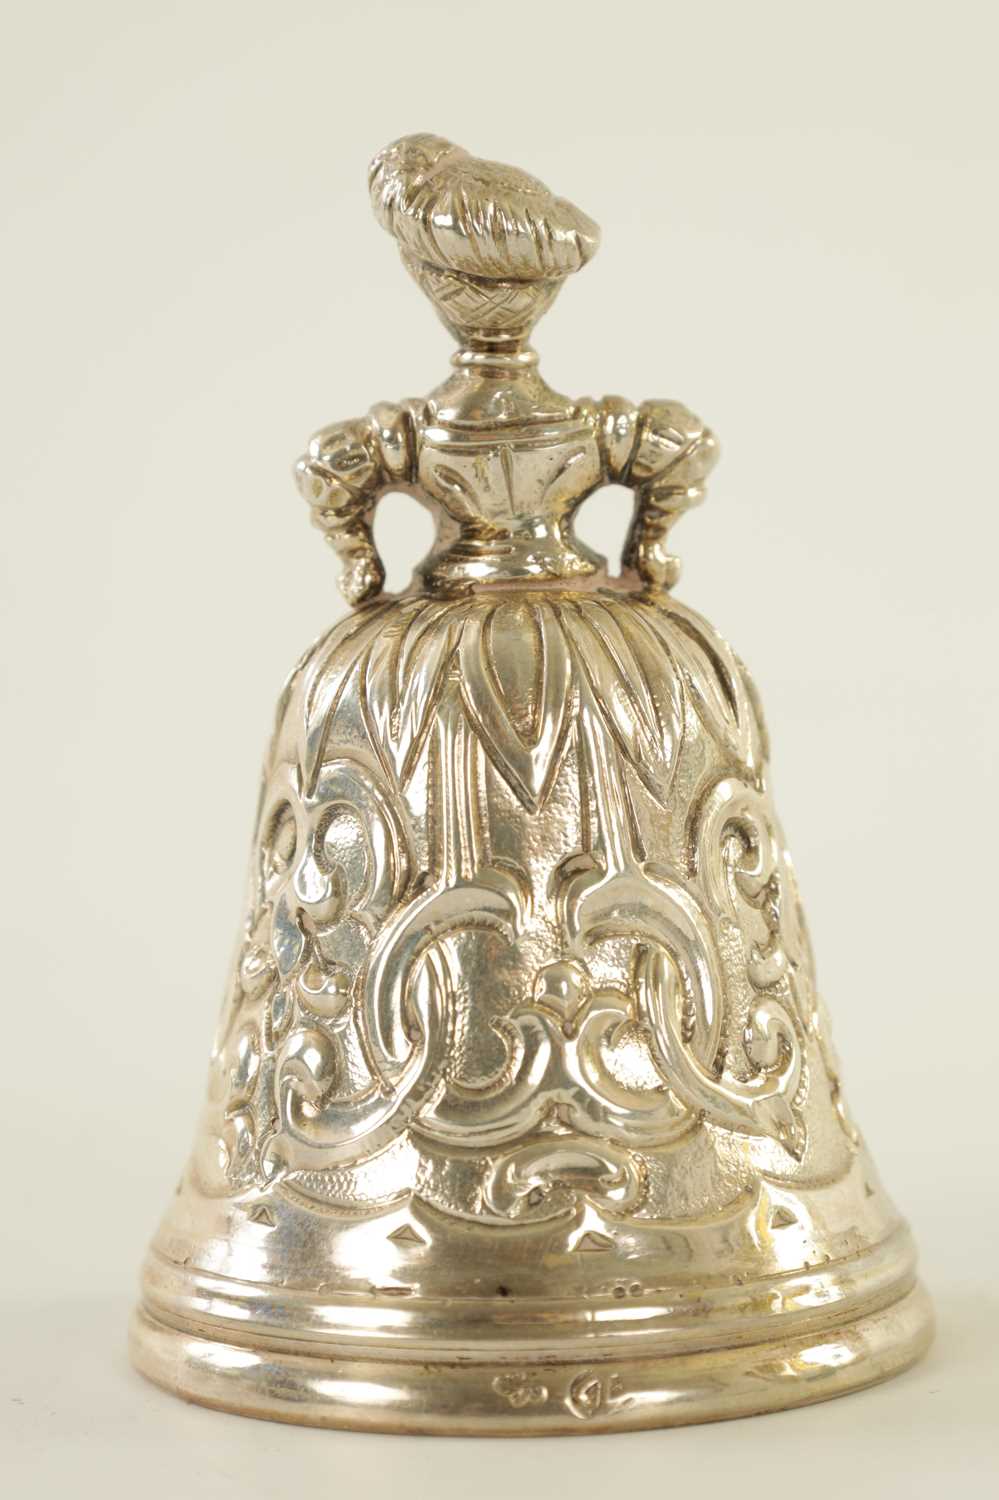 A LATE 19TH CENTURY DUTCH EMBOSSED MINIATURE BELL - Image 3 of 6